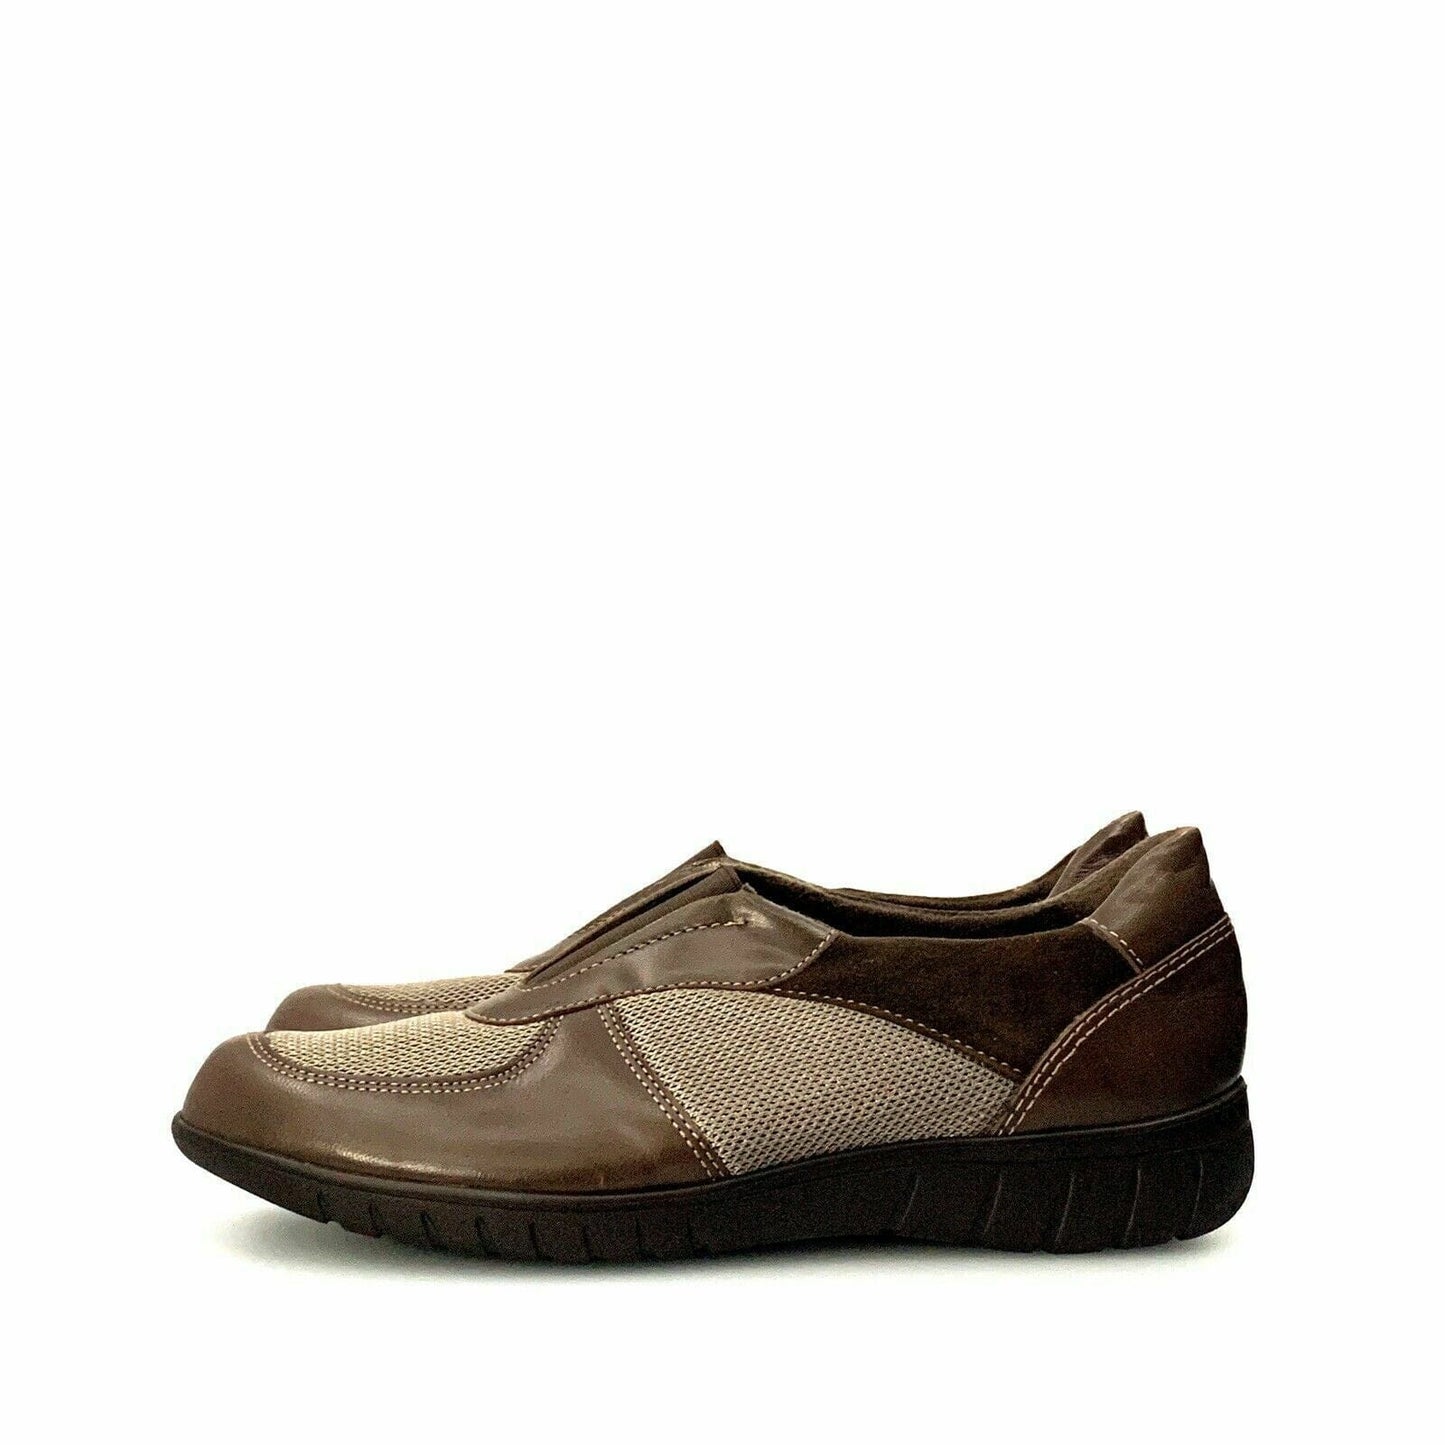 Munro American Womens Size 7.5N Brown Shoes Leather Sneakers Casual Slip Ons